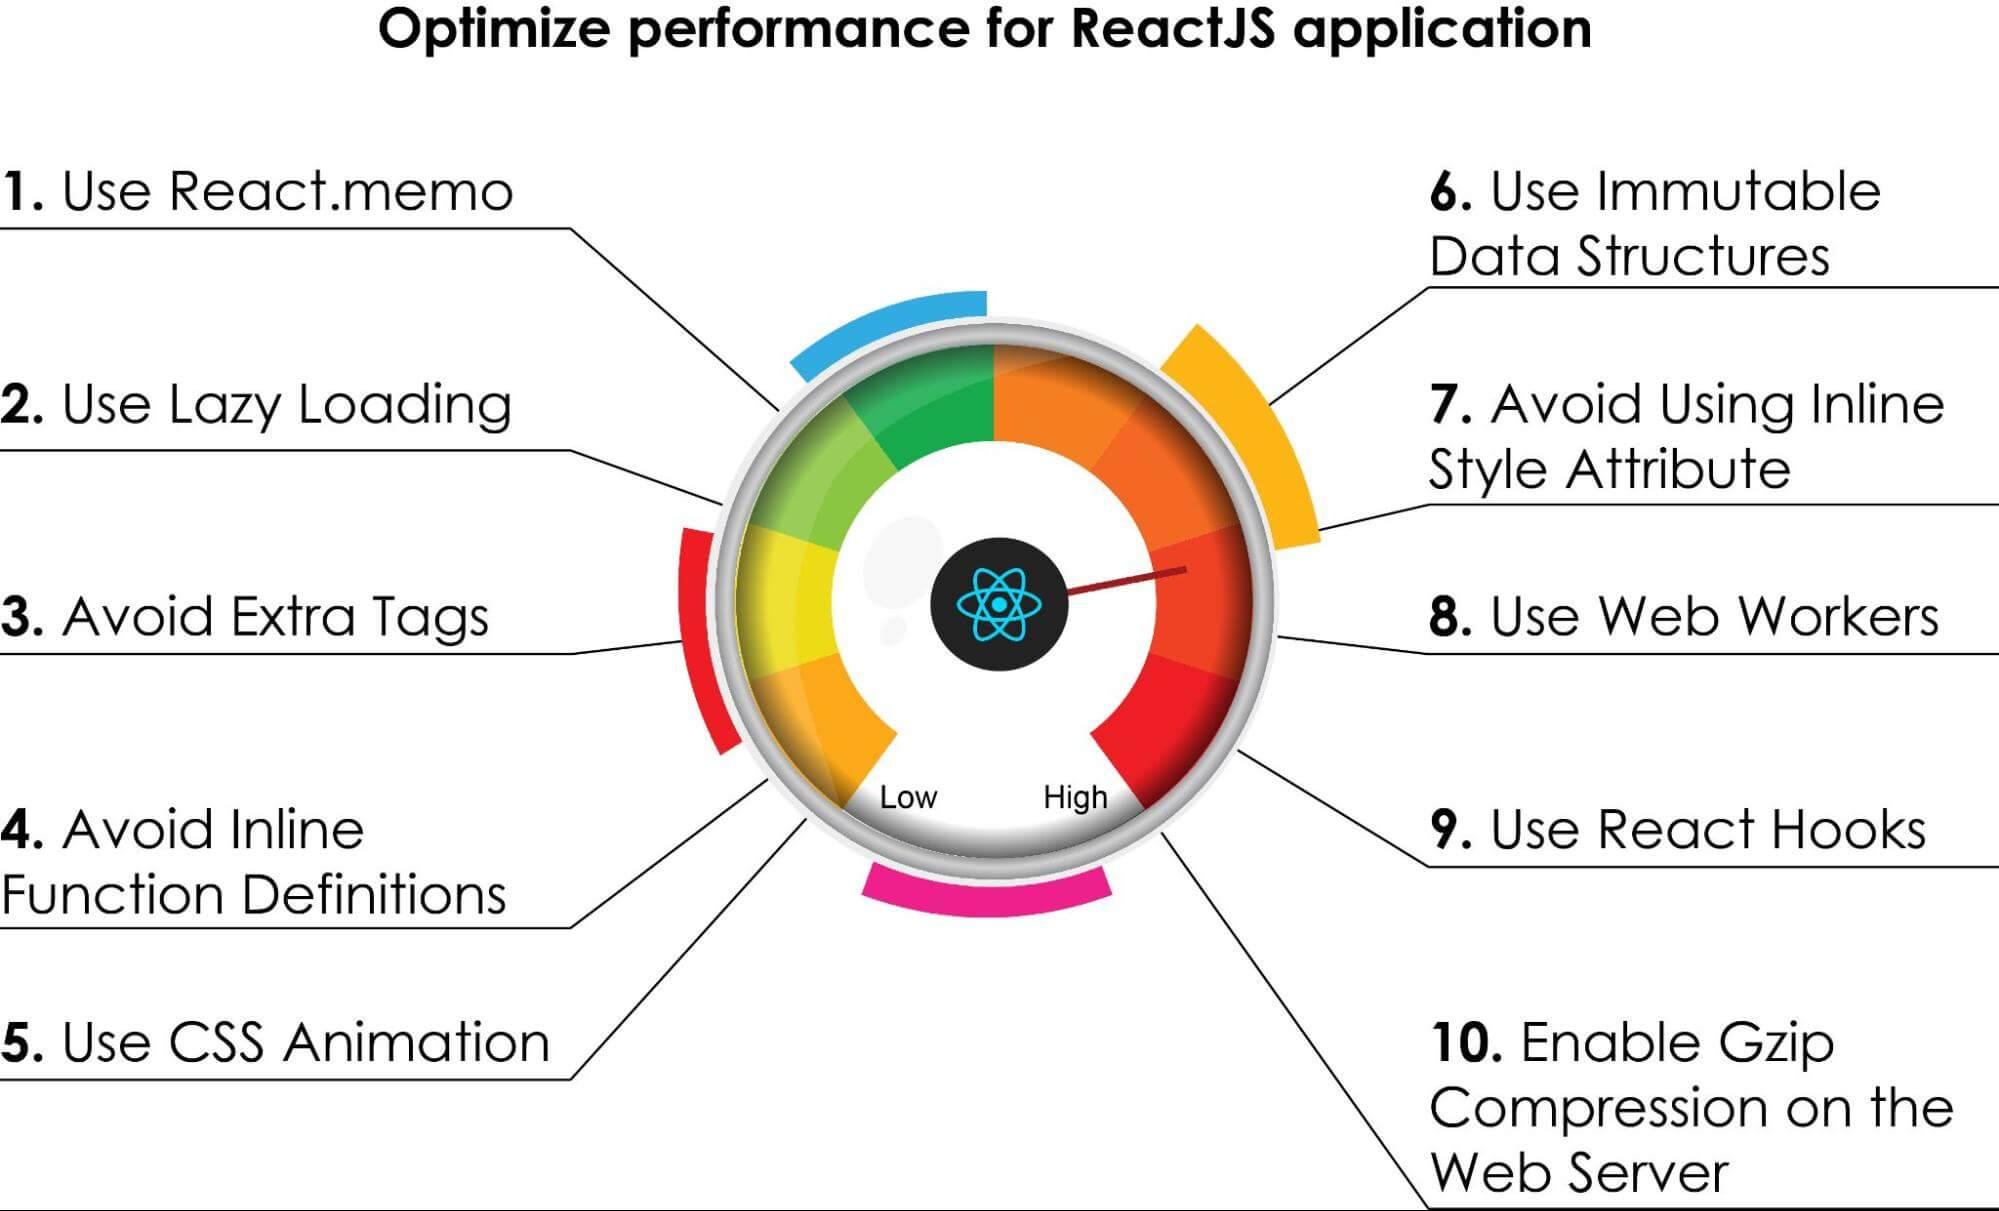 How to Optimize Performance for ReactJS Application